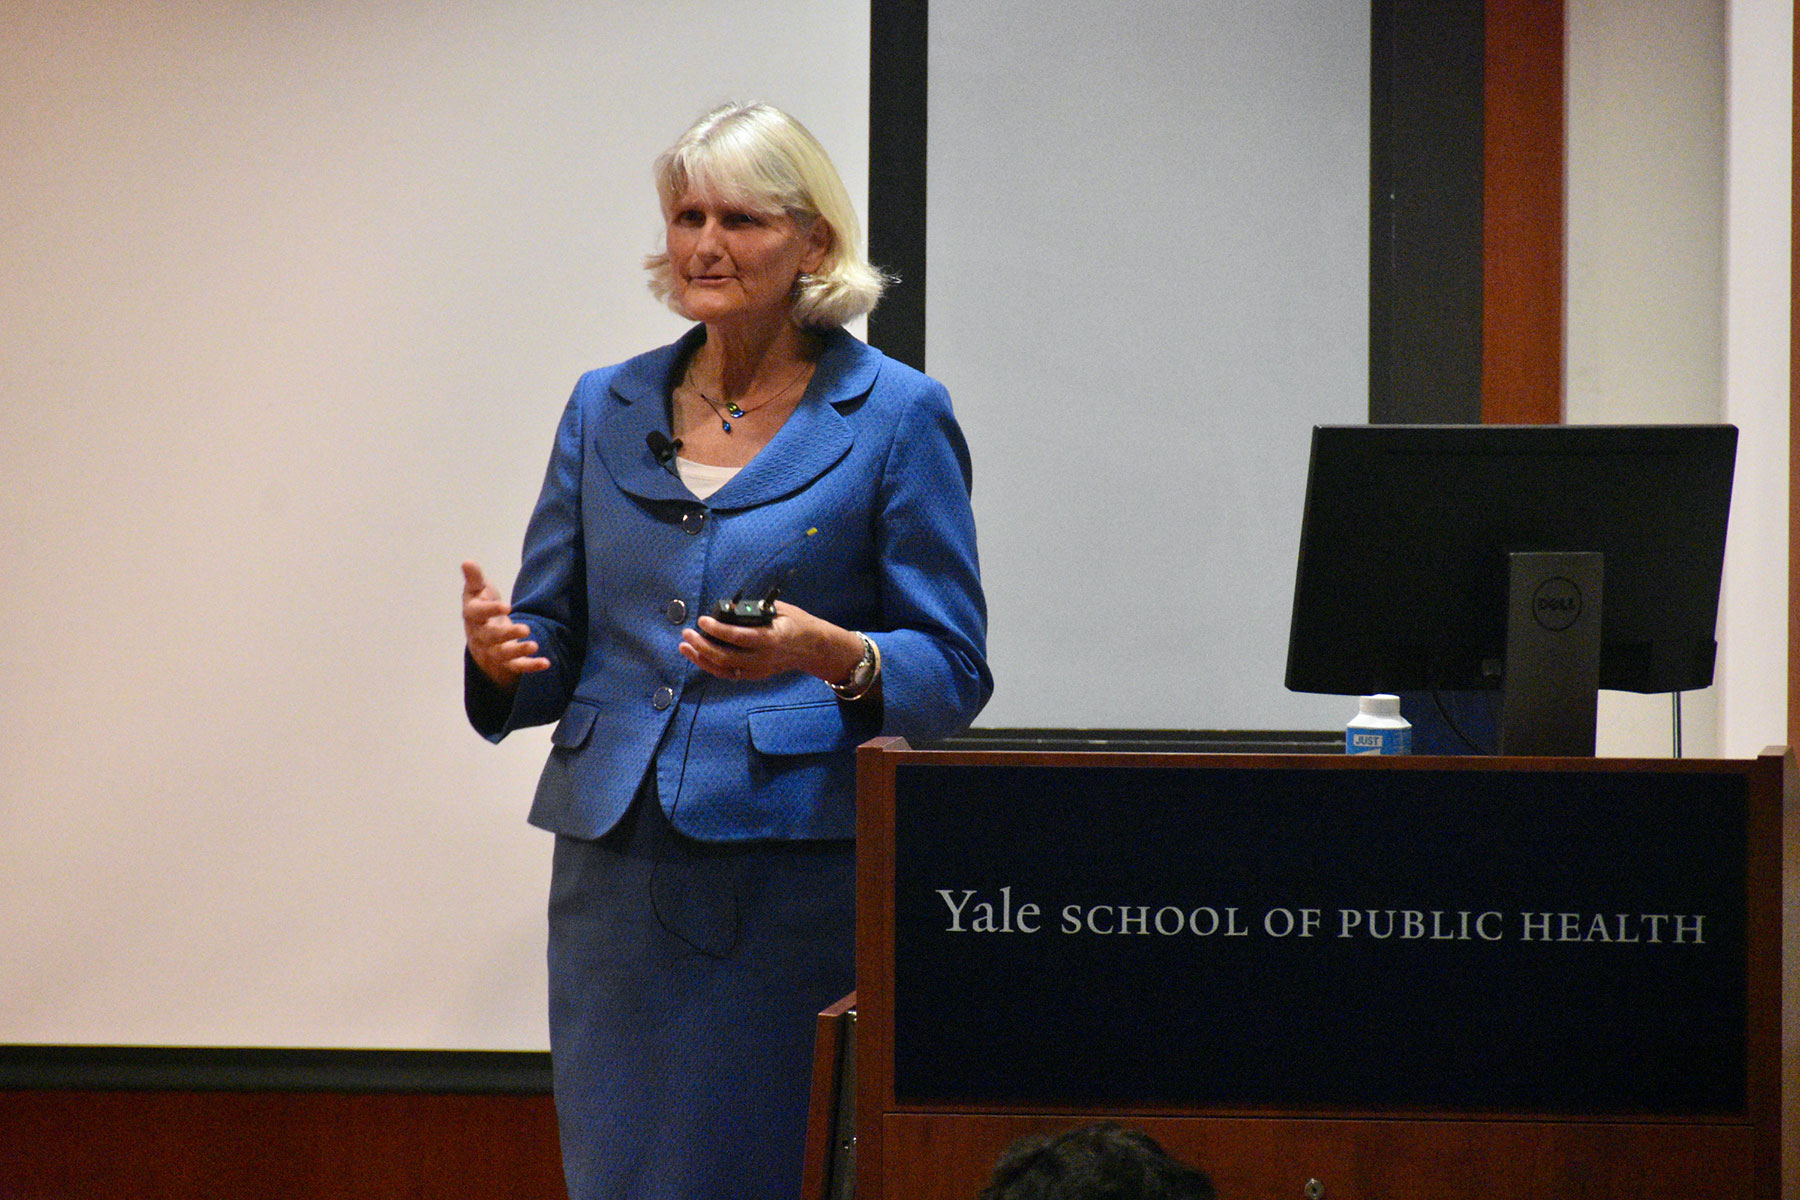 Pictured: Elizabeth Bradley. Person lecturing in front of a podium with the writing, "Yale School of Public Health."